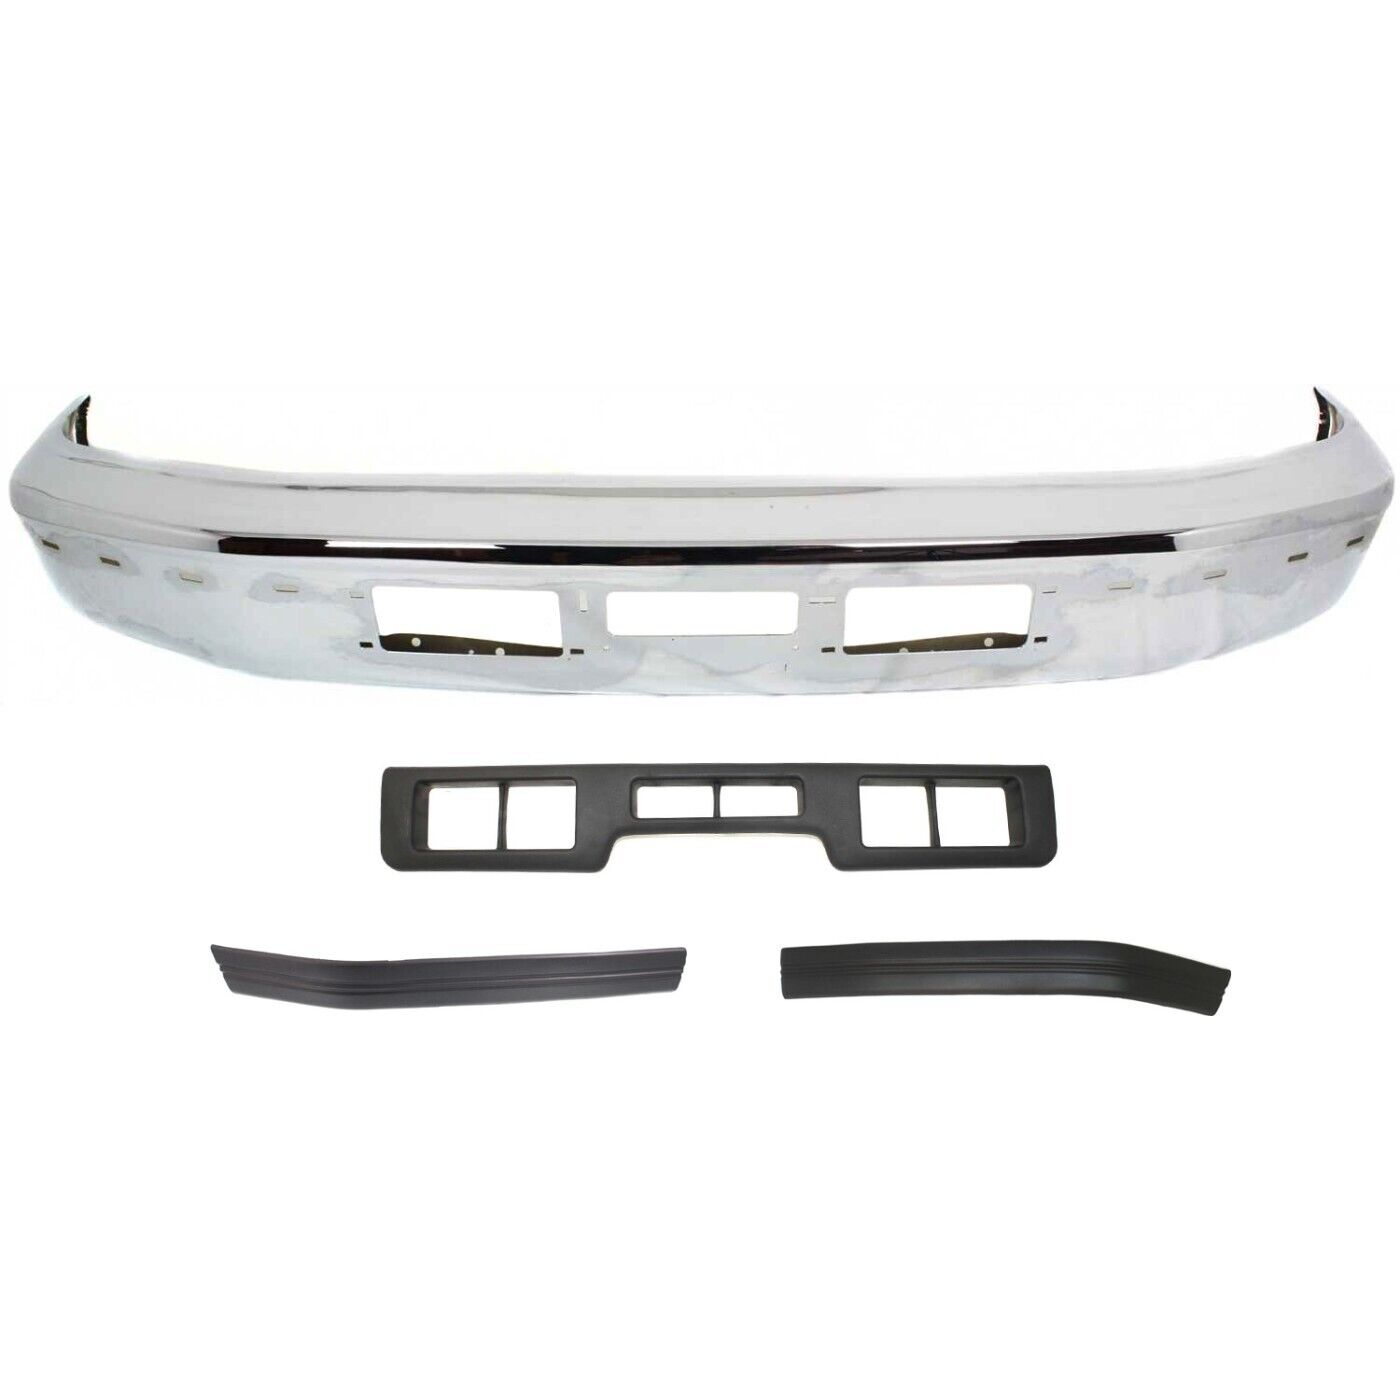 Bumper Kit For 1992-1996 Ford F-150 Bronco Front Chrome Steel with Bumper Trims